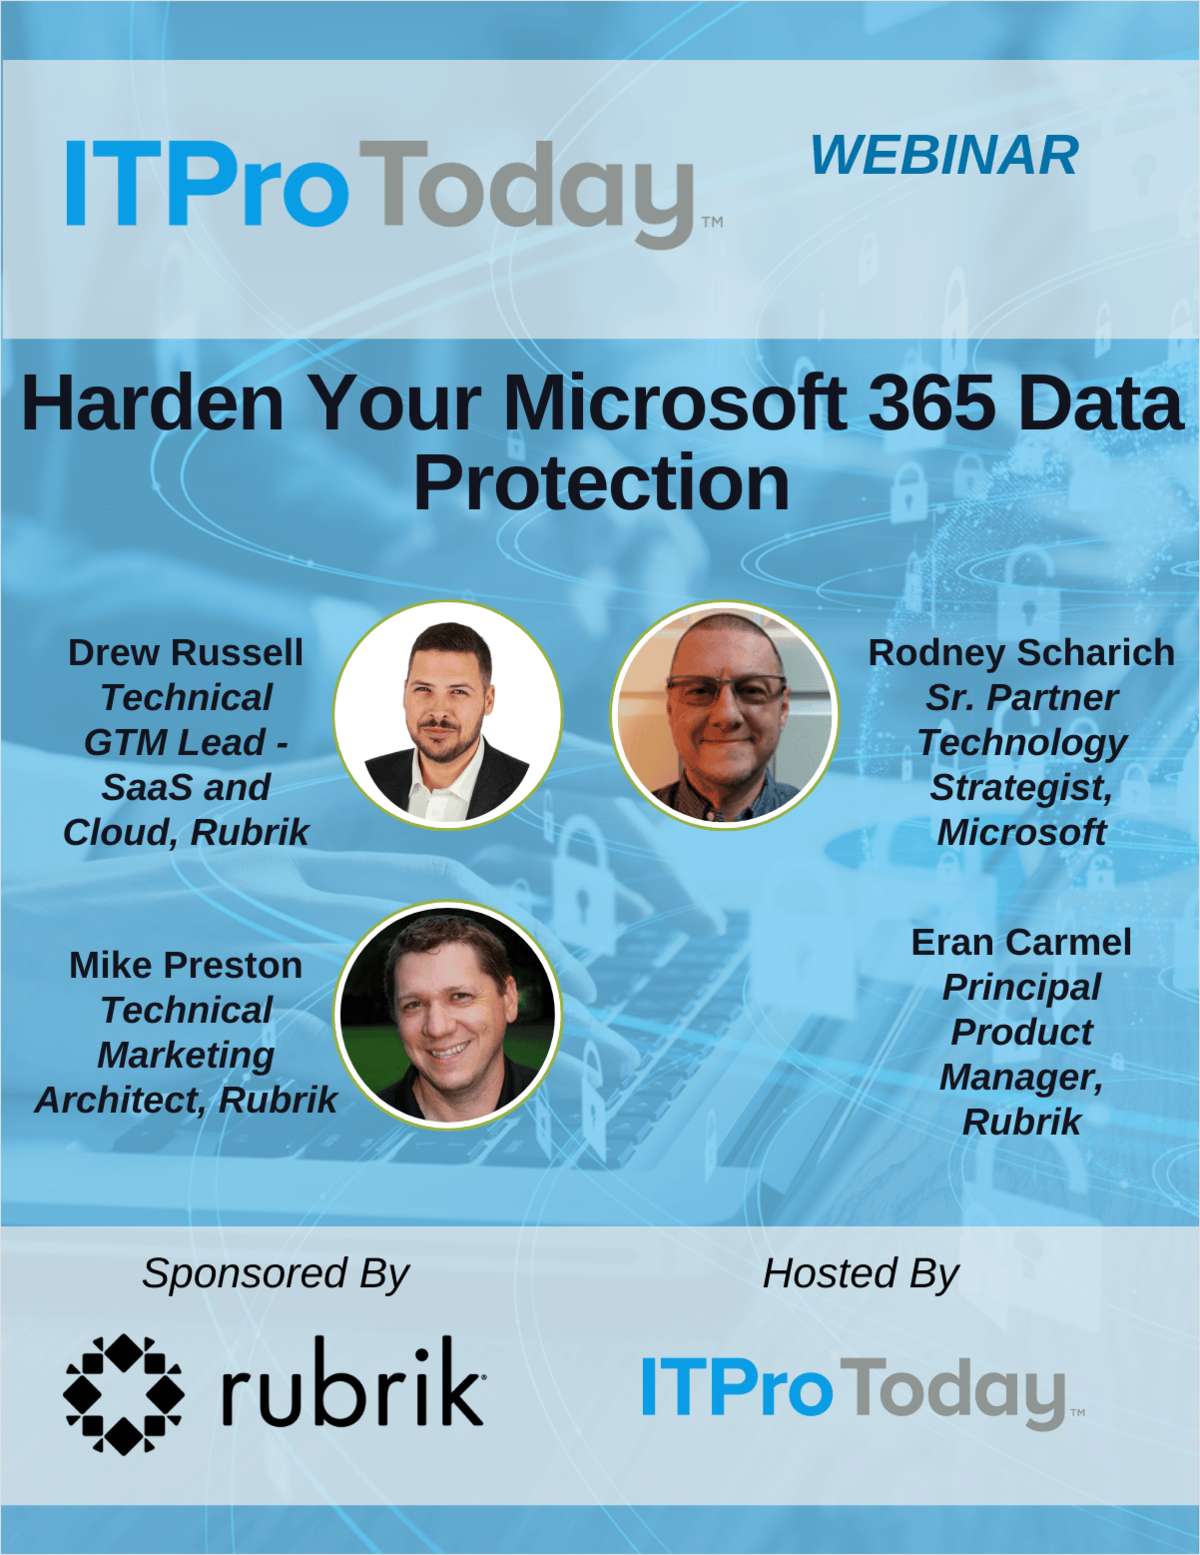 Harden Your Microsoft 365 Data Protection